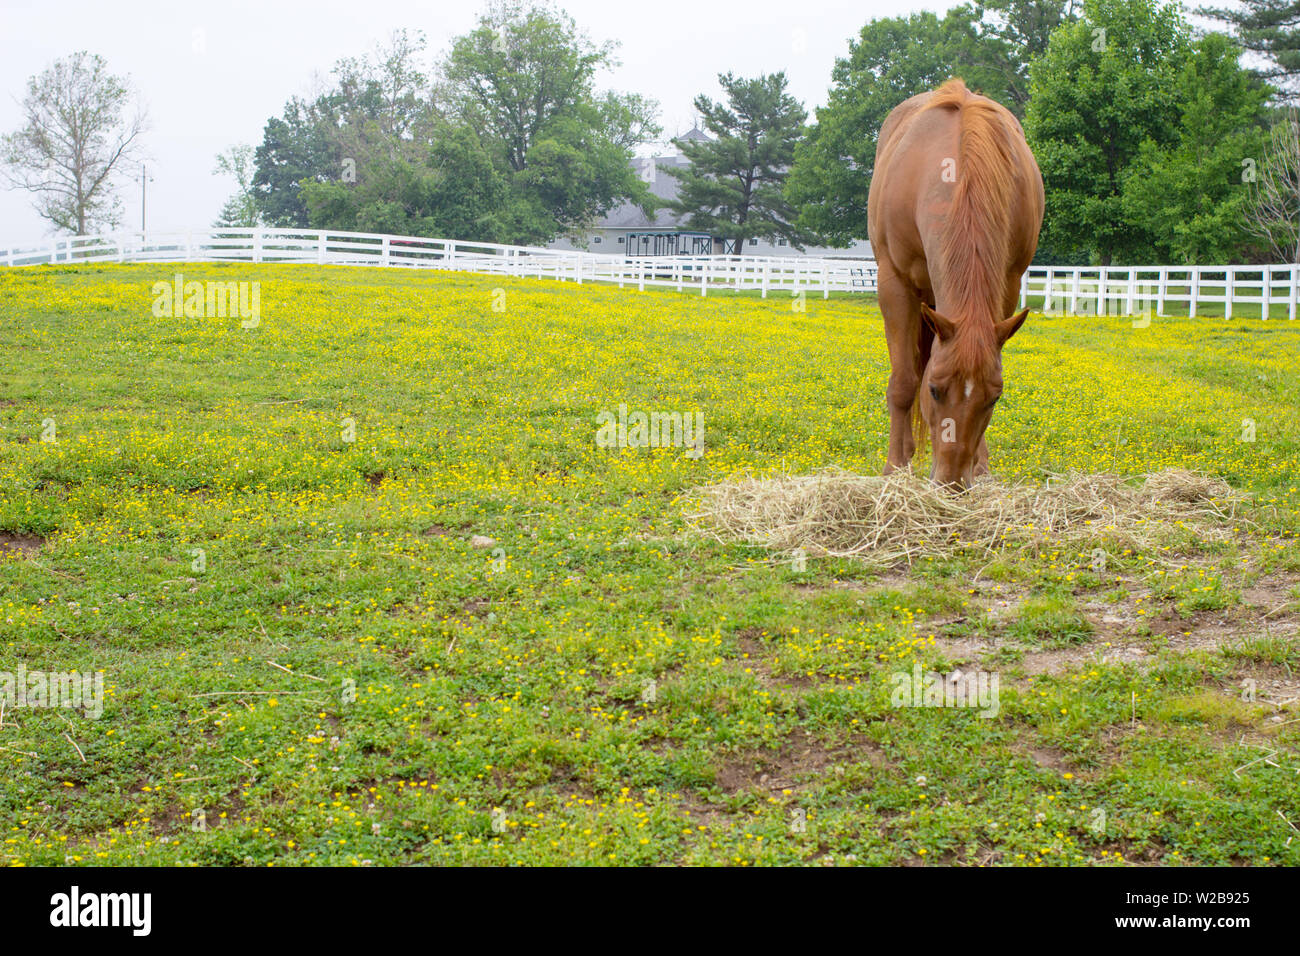 Lexington Kentucky Bluegrass Country. Thoroughbred horse grazes in a pastoral pasture surrounded by yellow wildflowers. Stock Photo